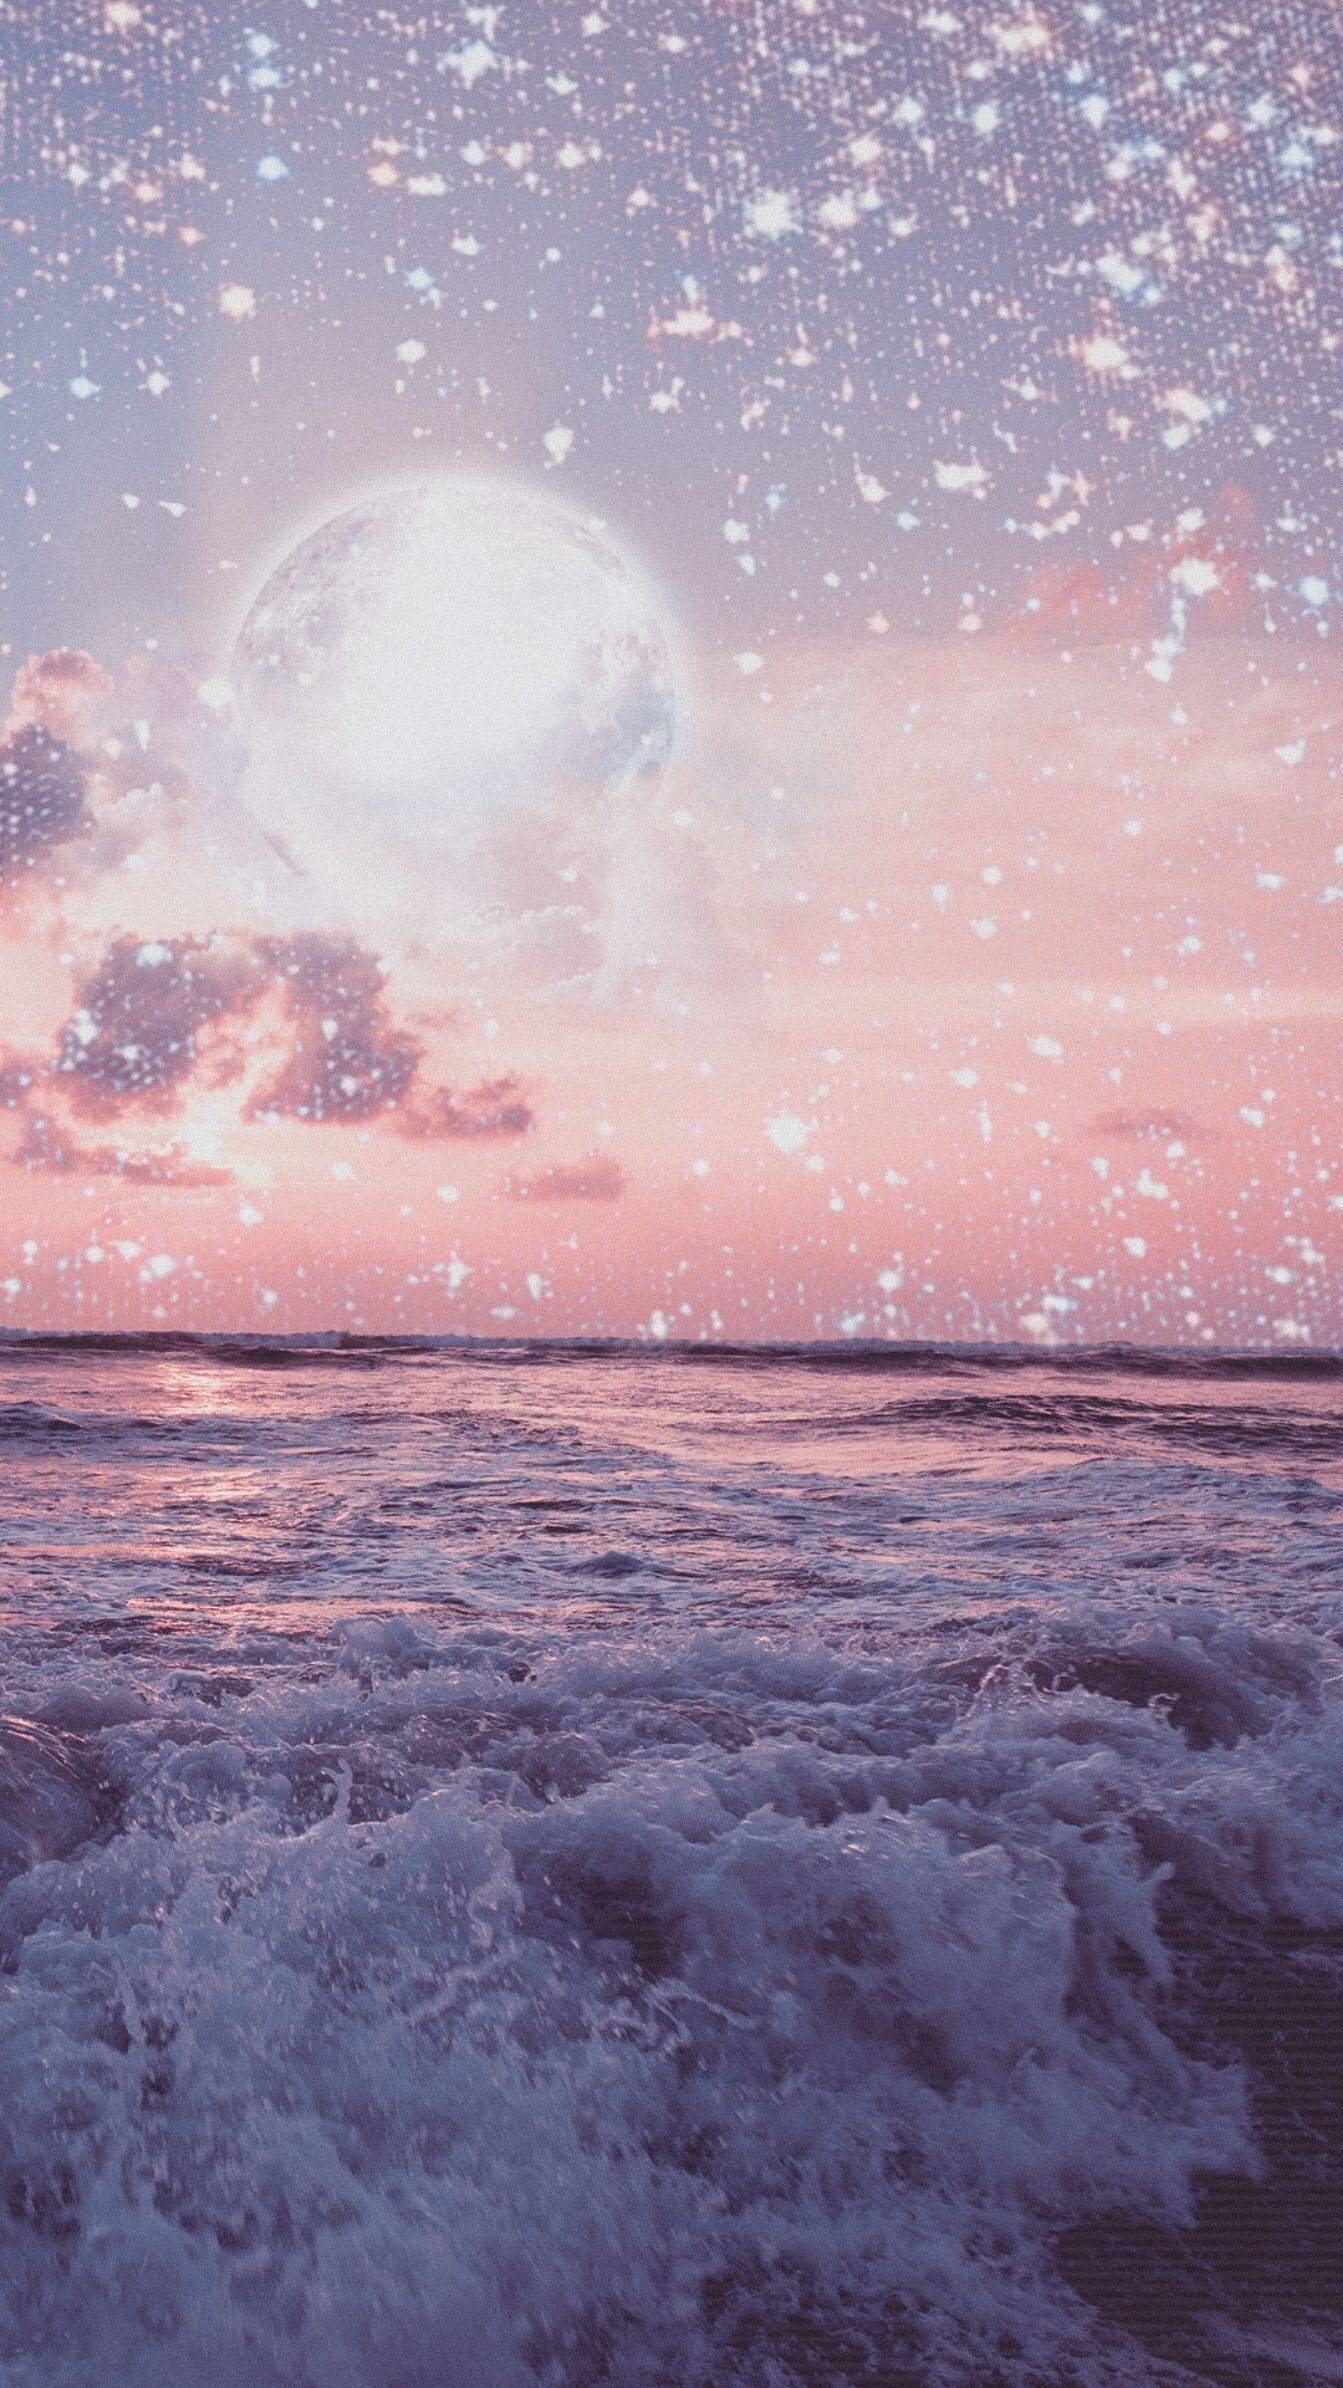 A picture of the ocean with stars in it - Glitter